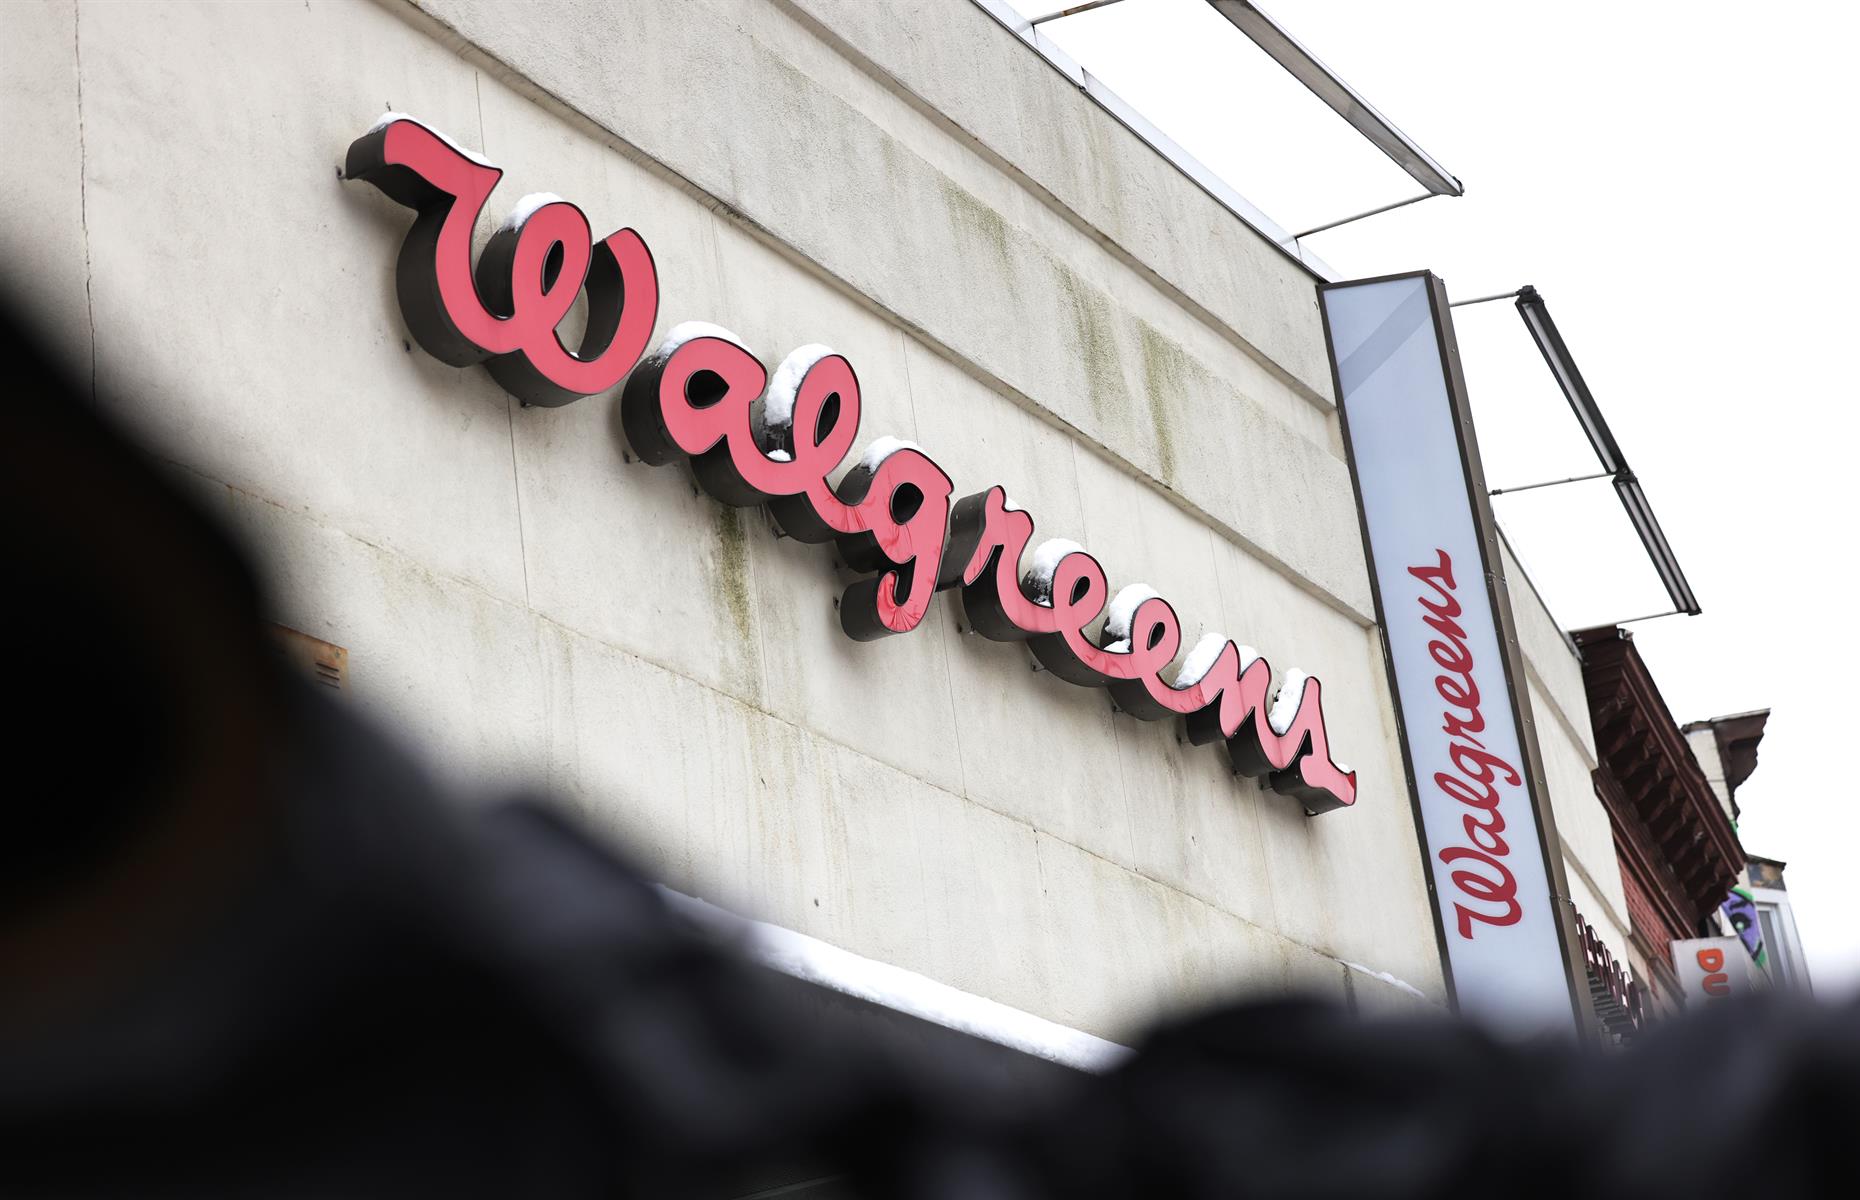 Backed by Walgreens